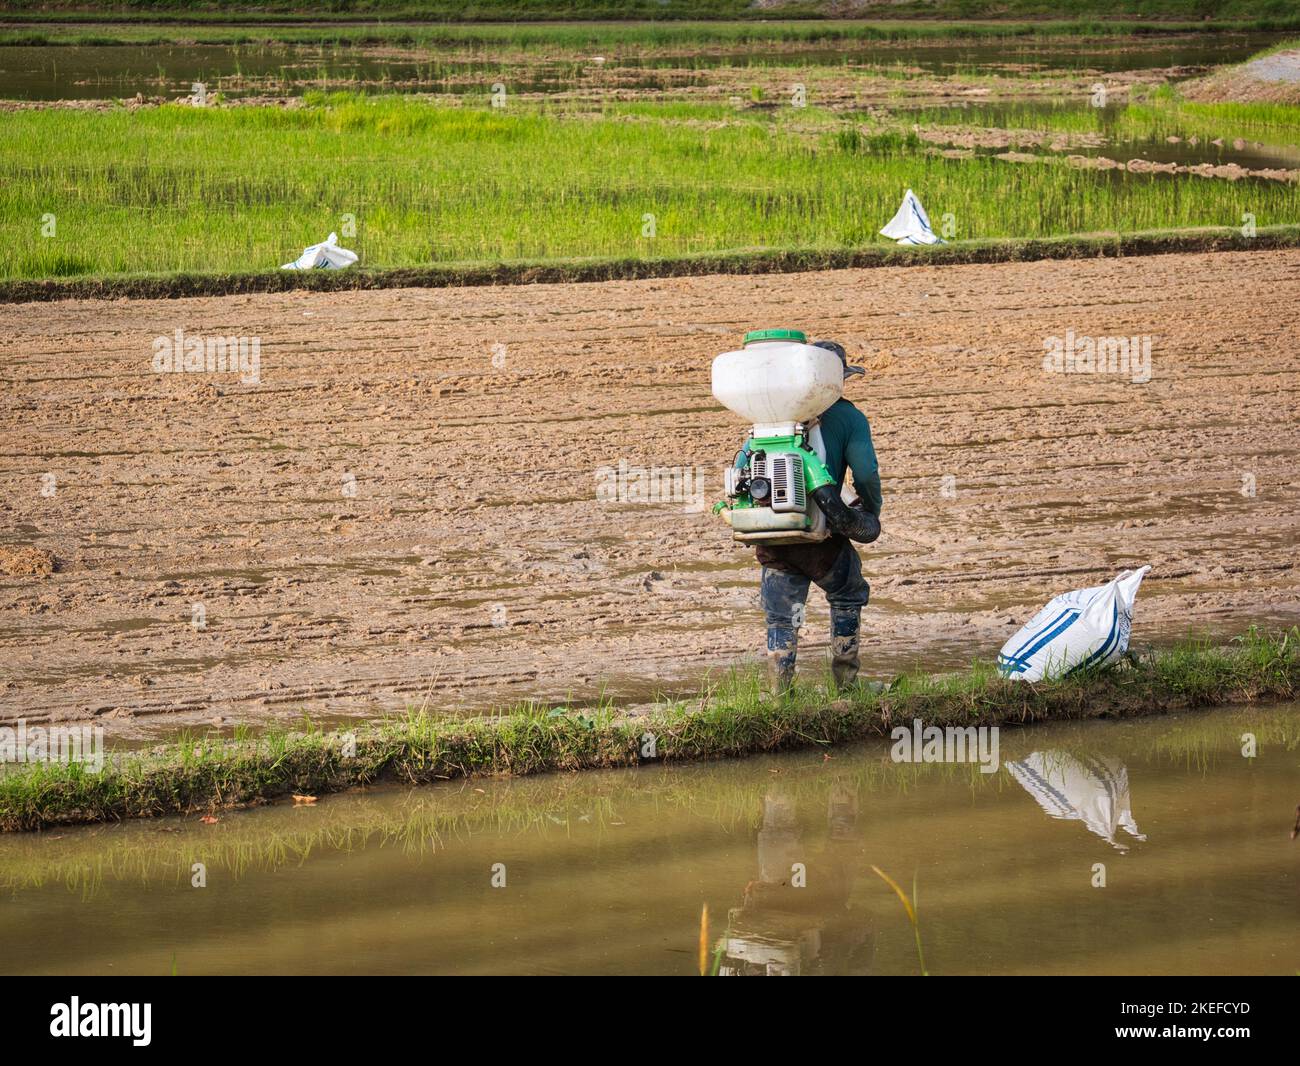 A man is using power sprayer to spray rice seeds for rice seedling Stock Photo